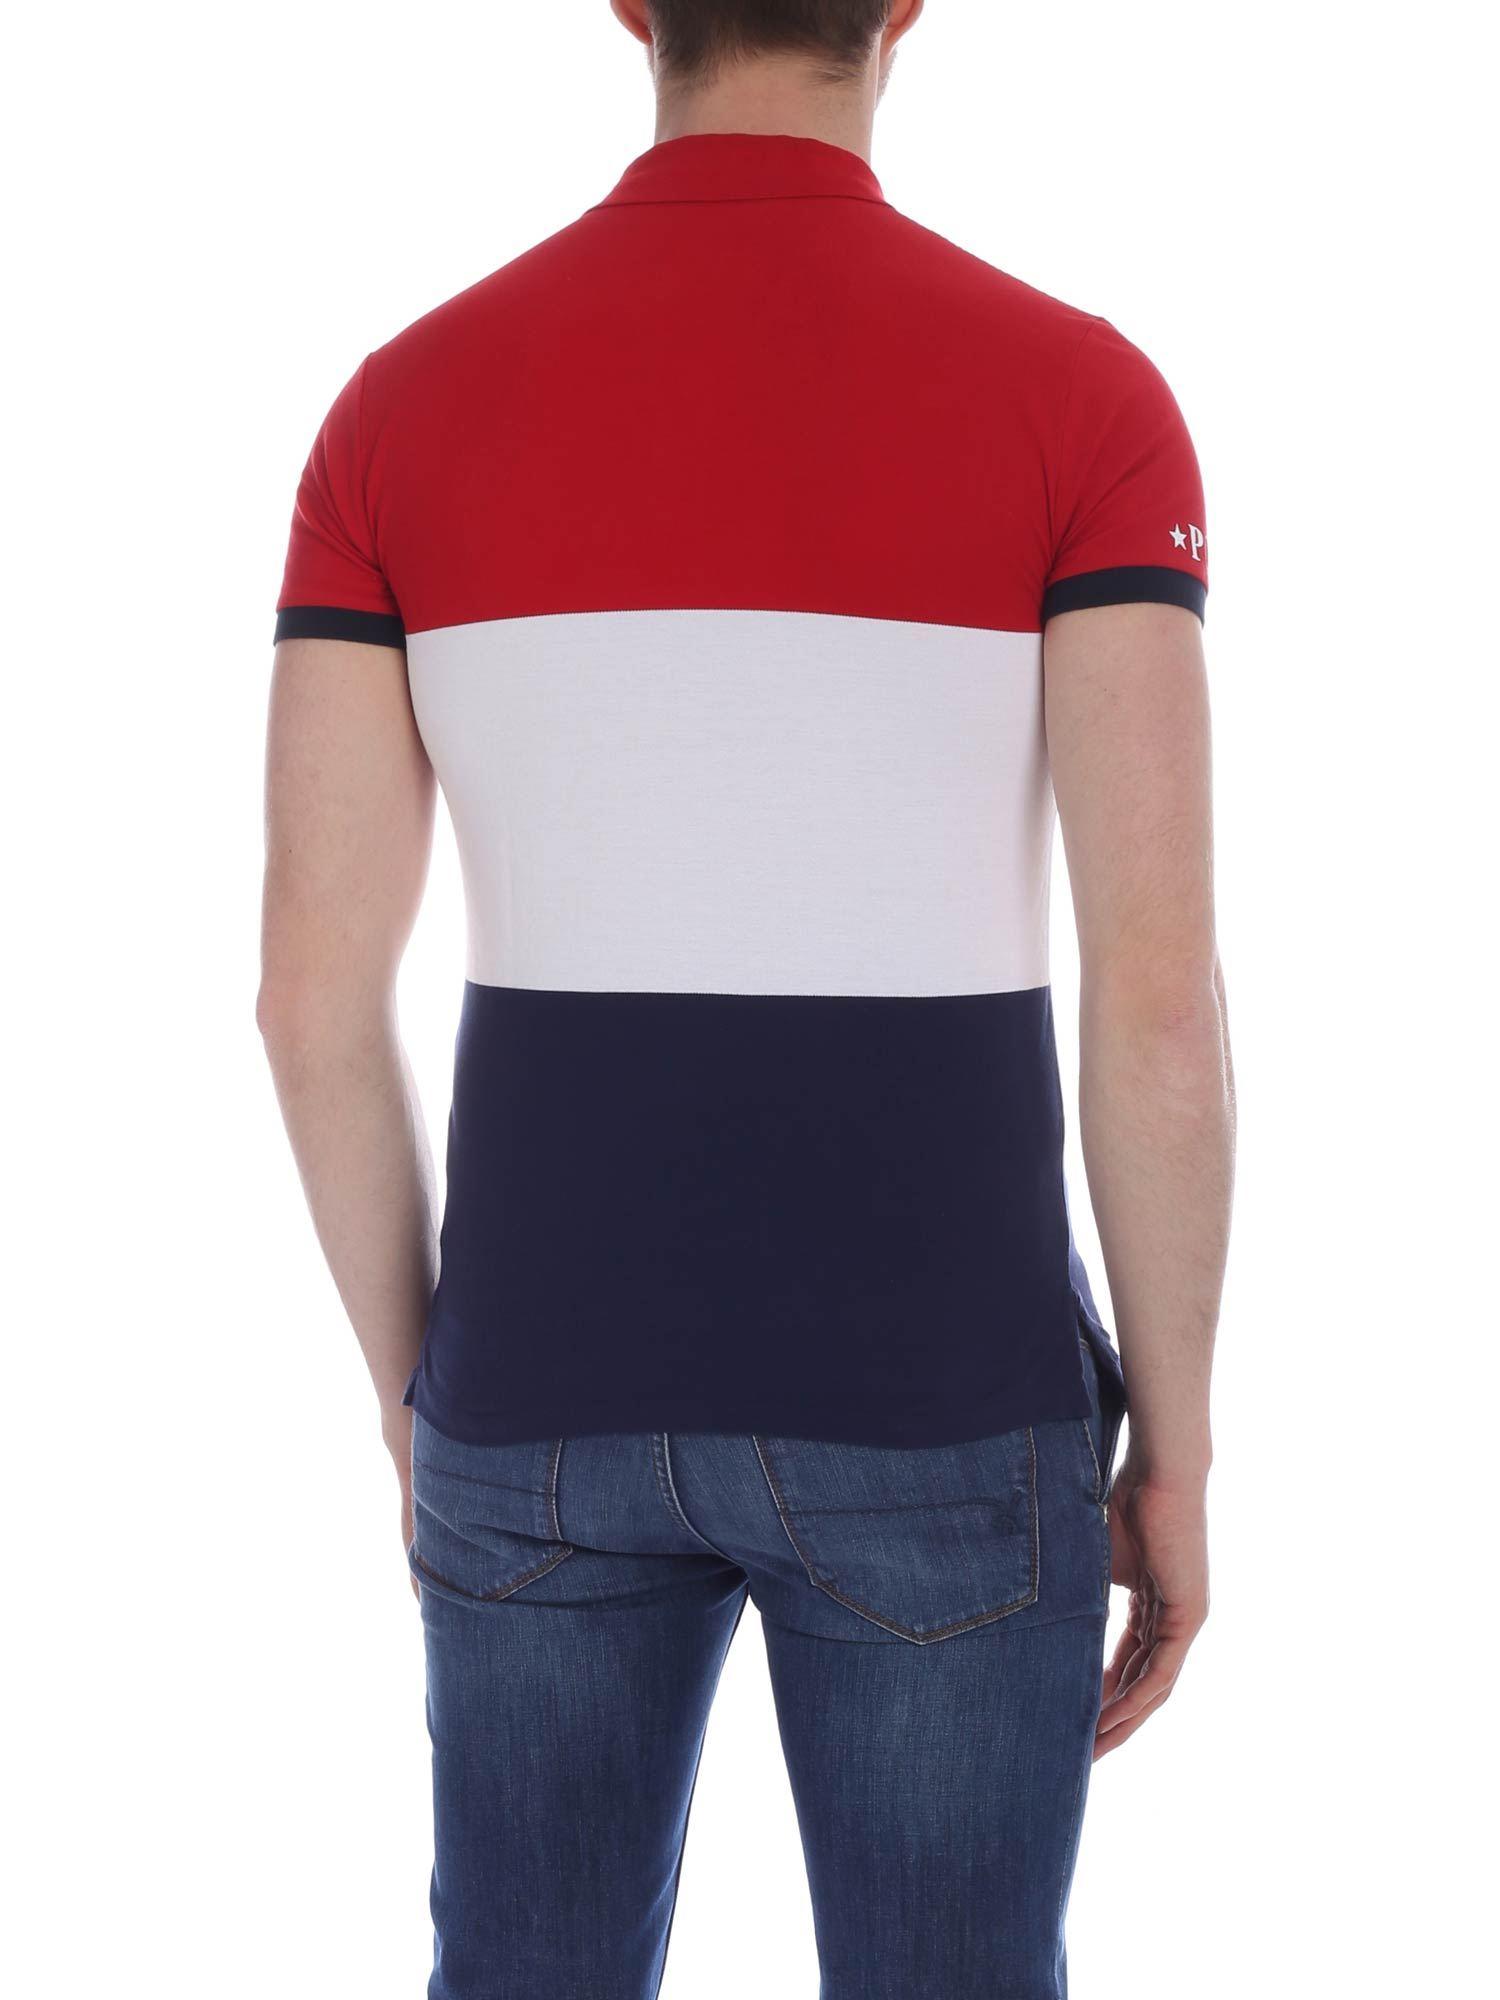 Ajh Red White And Blue Polo Shirt, Red White And Blue Rugby Shirt